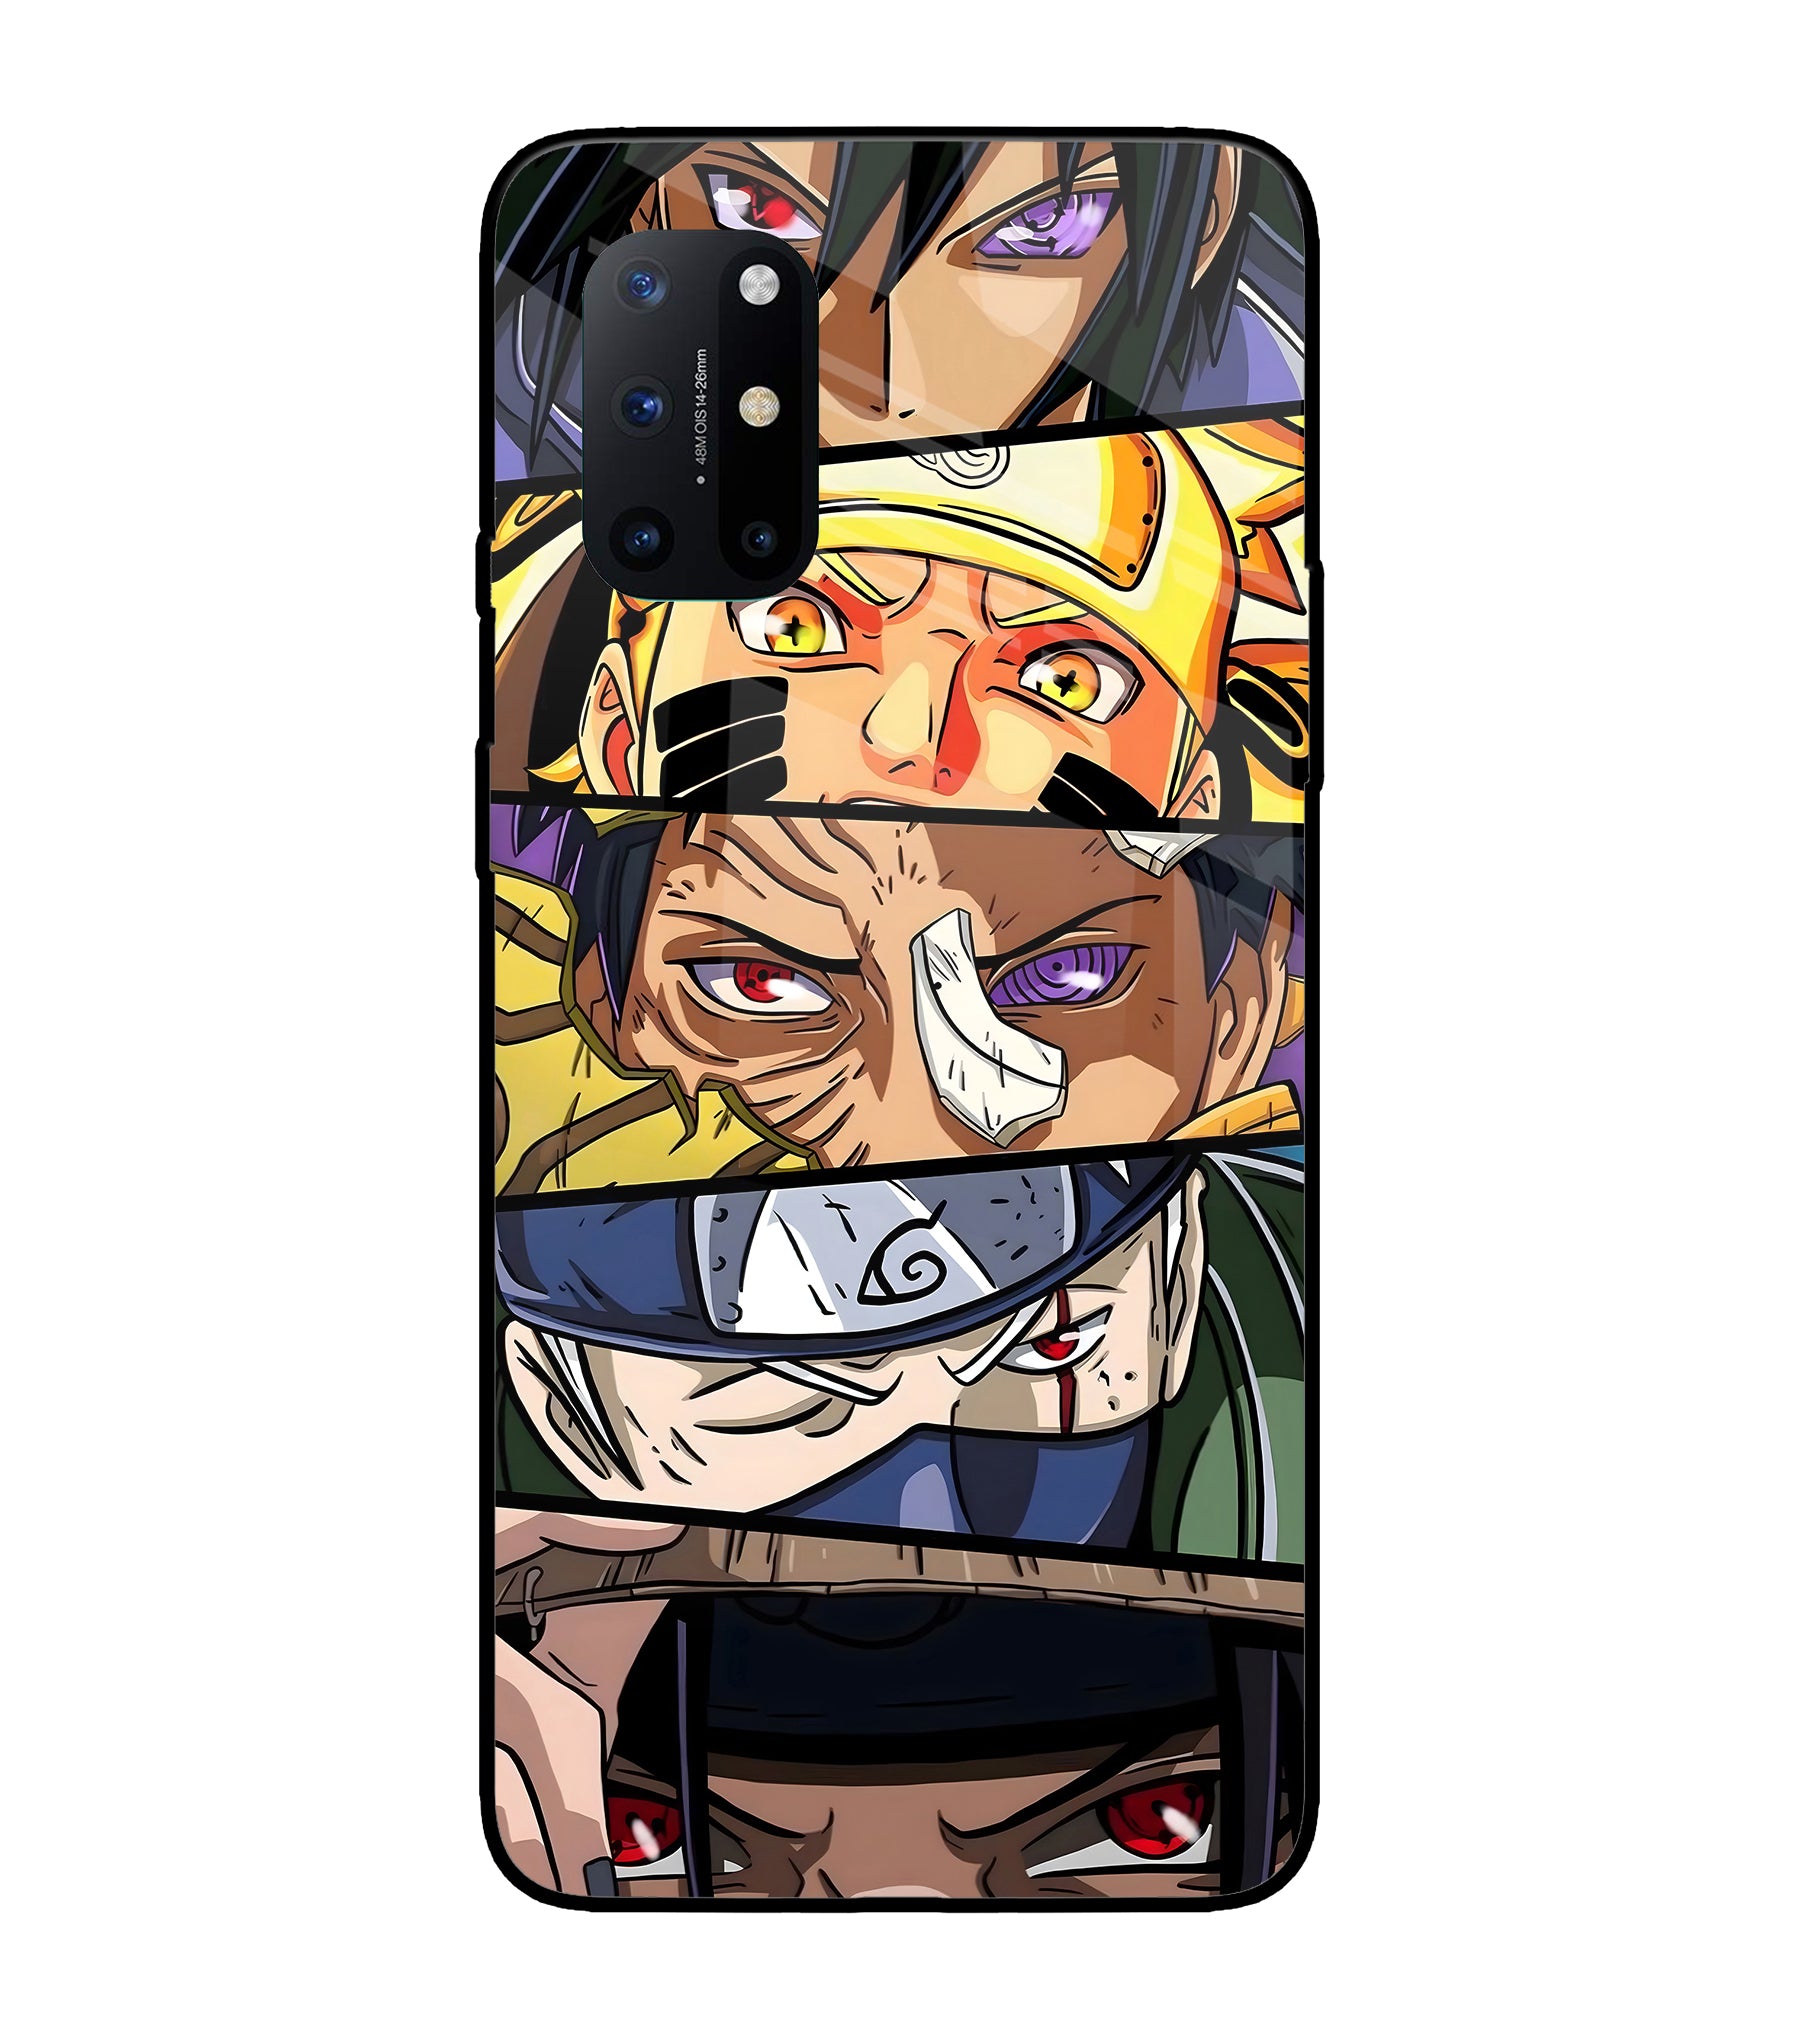 Naruto Character Oneplus 8T Glass Cover